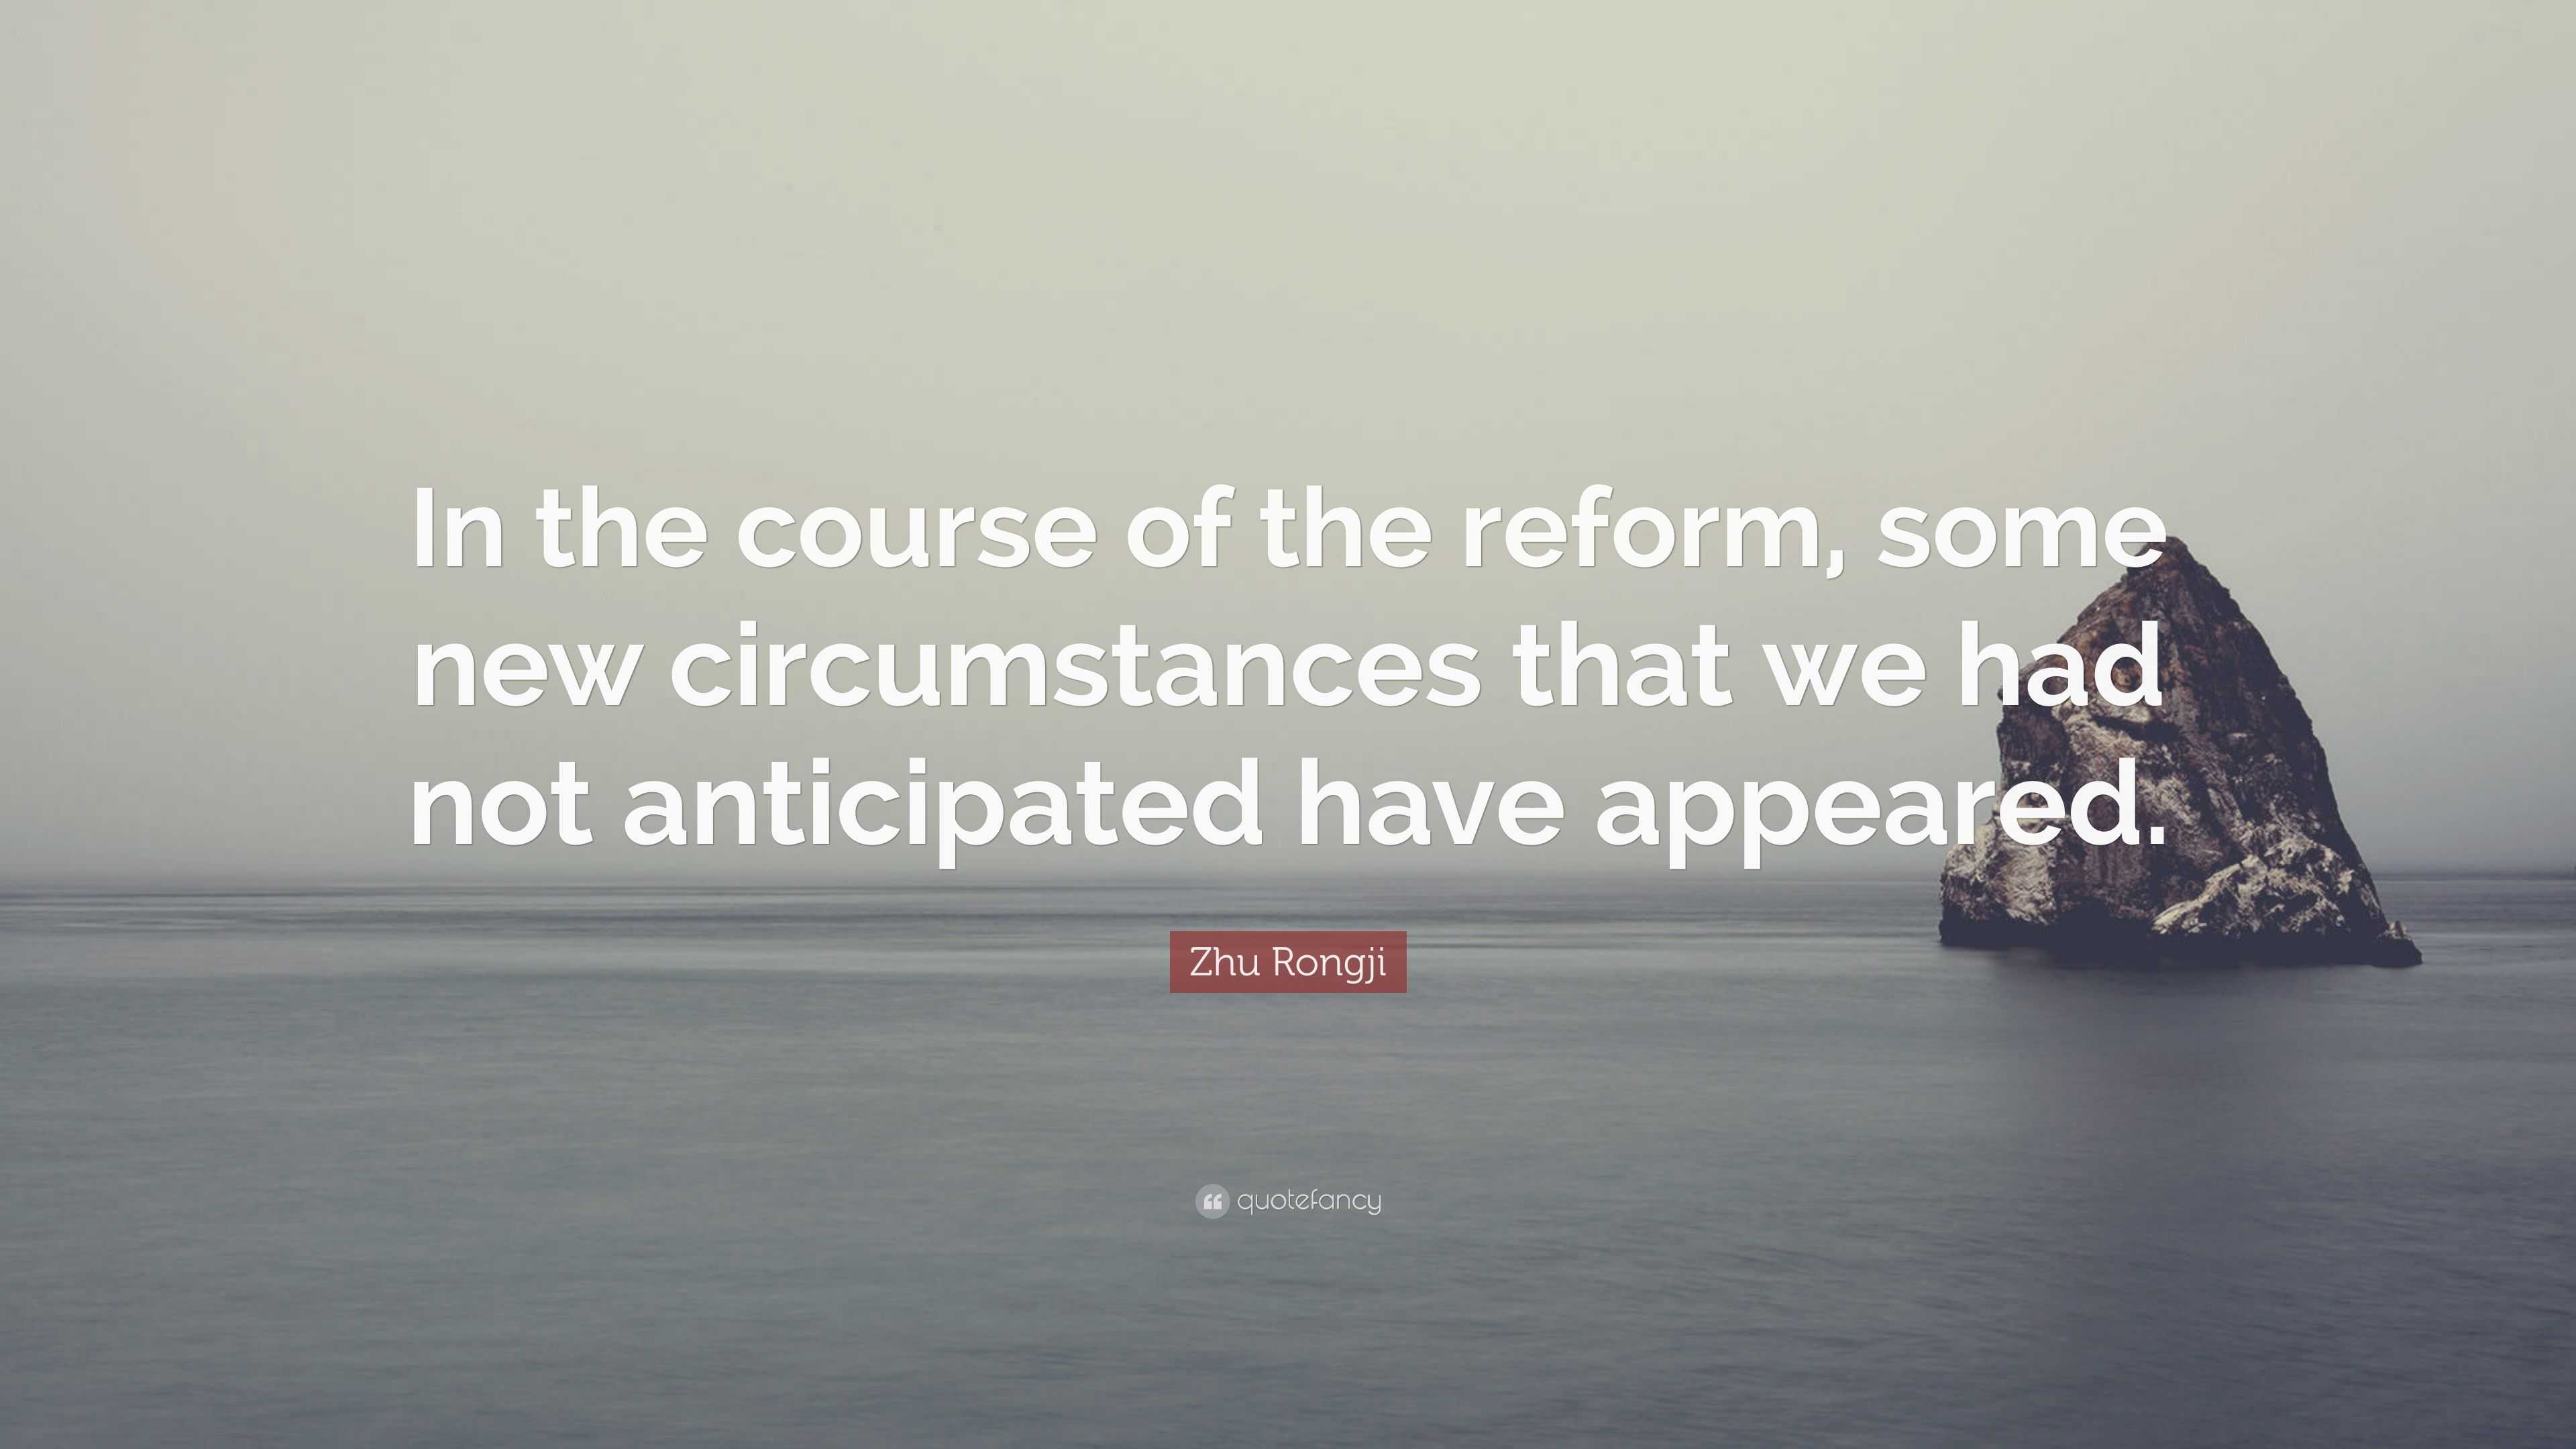 Zhu Rongji Quote: “In the course of the reform, some new circumstances ...